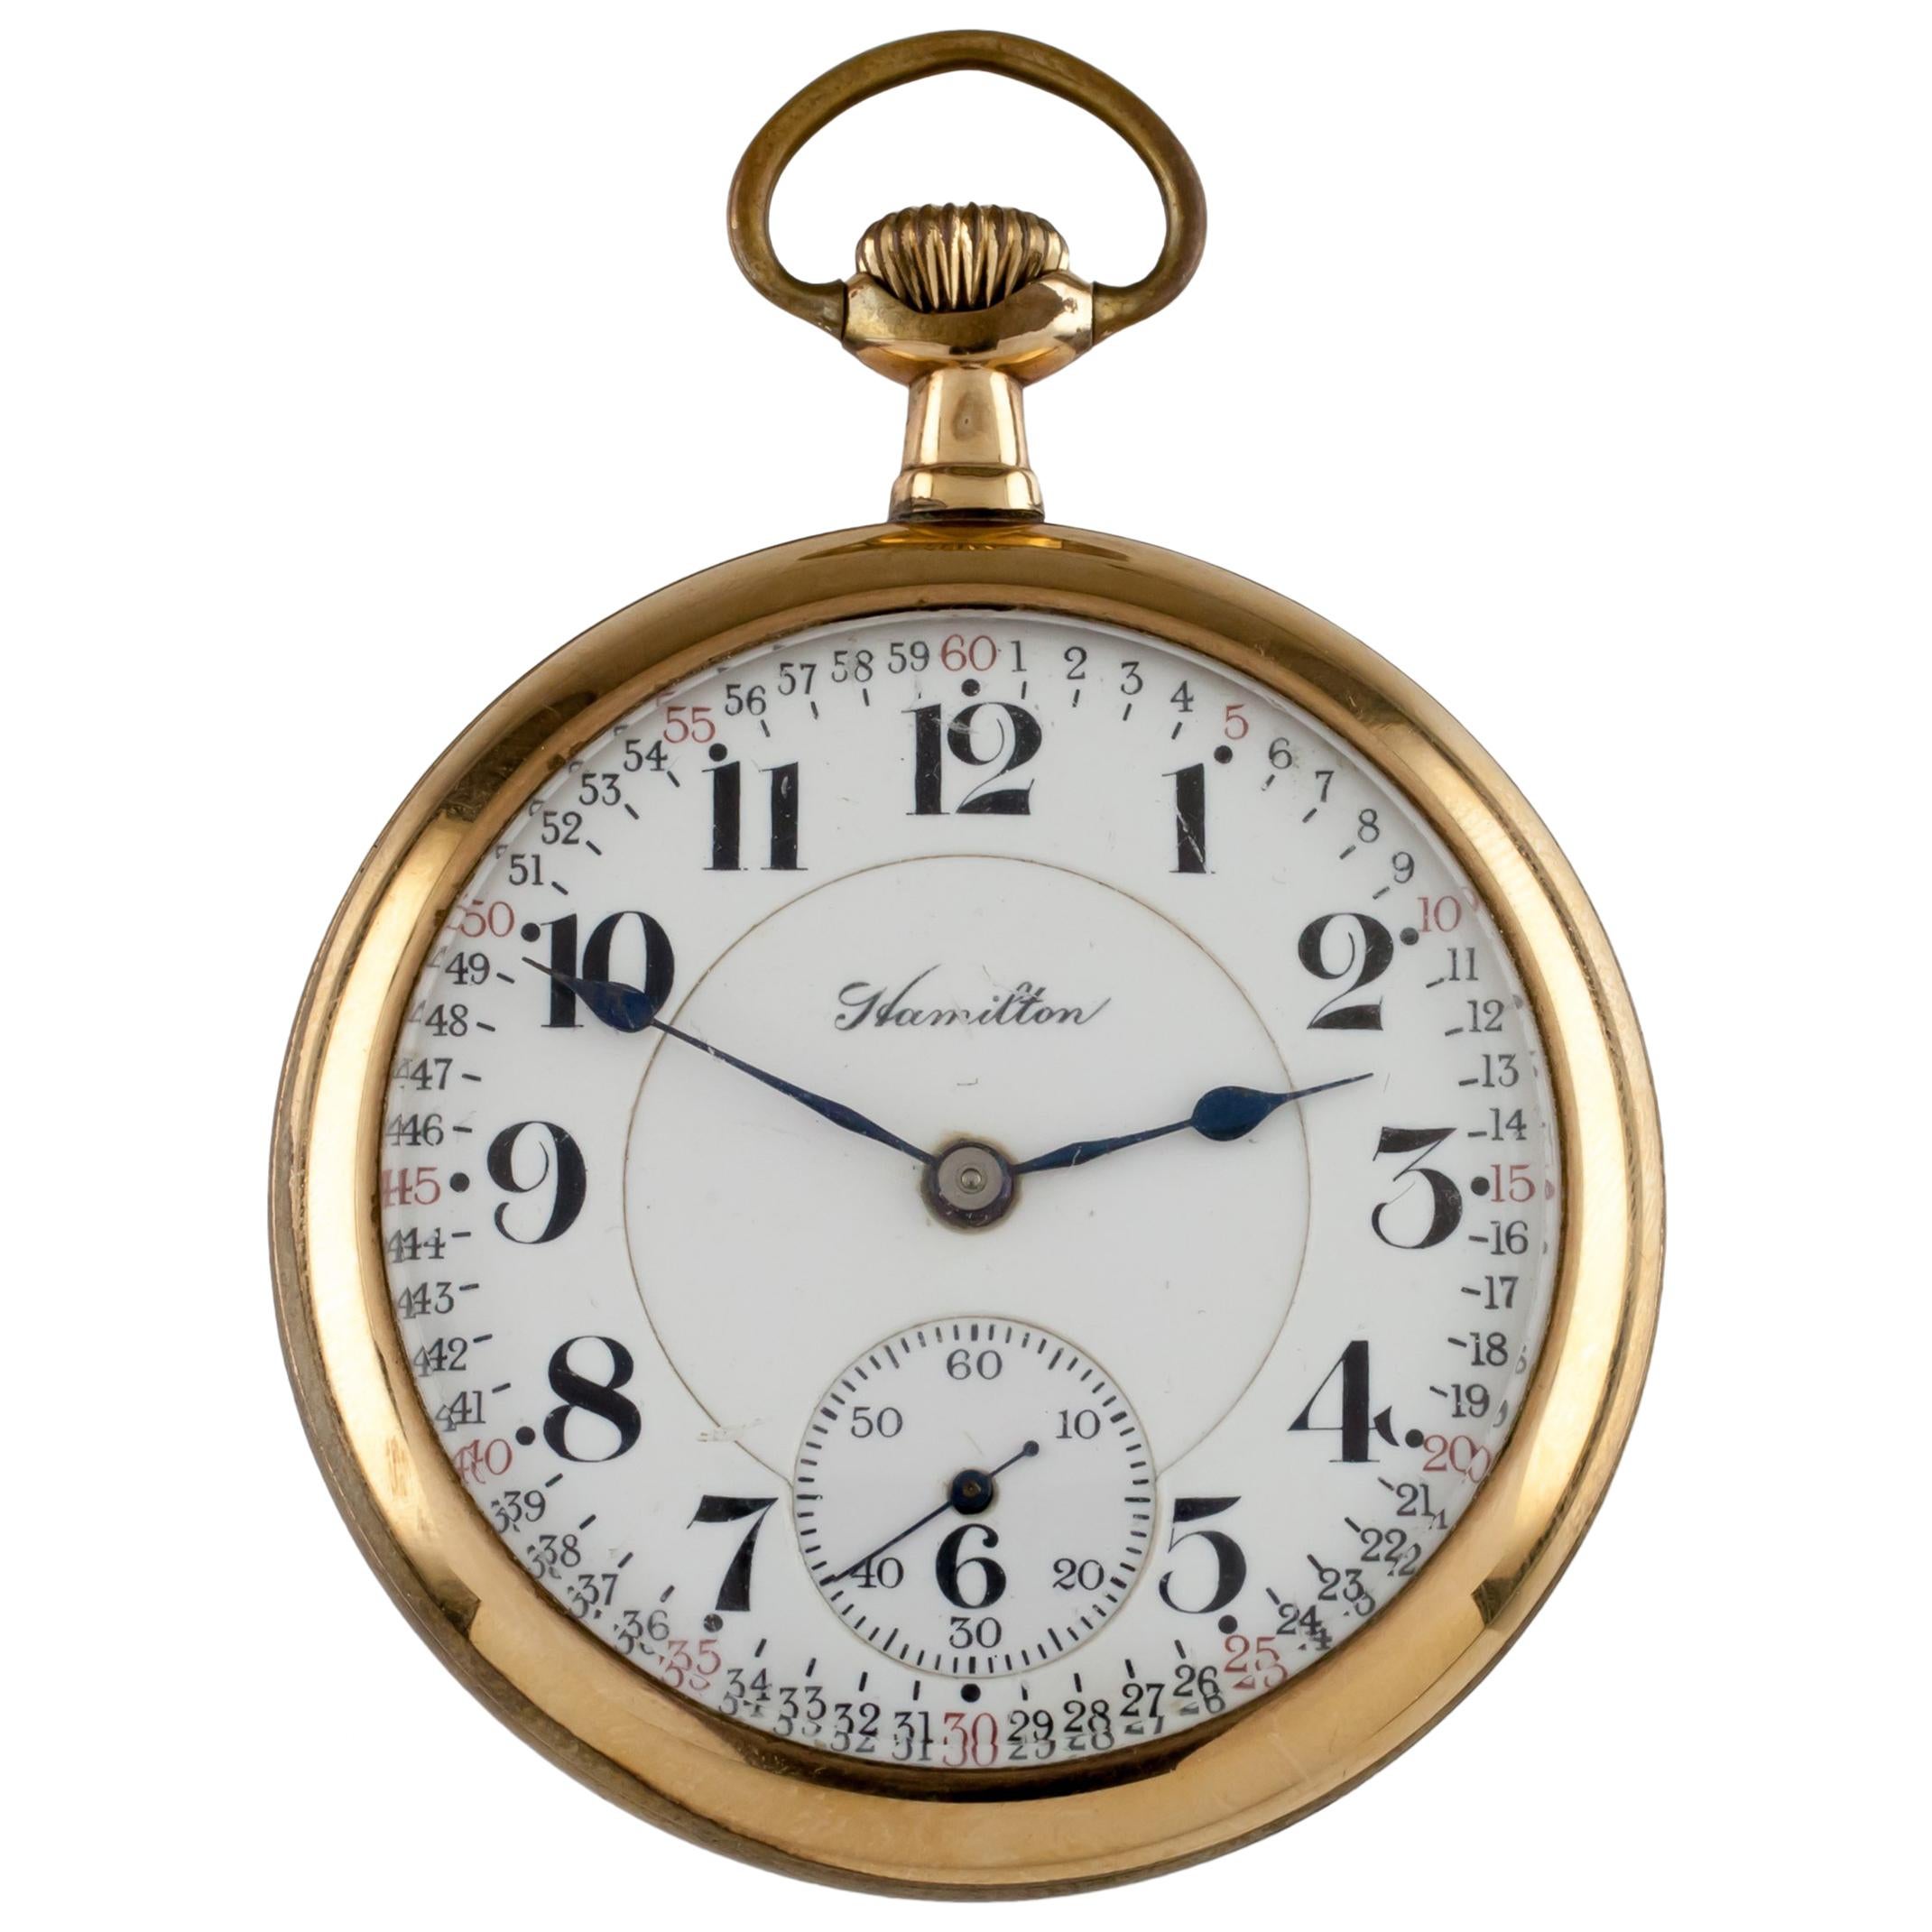 Hamilton Yellow Gold Filled Antique Pocket Watch Gr 992 21 Jewels, 1913